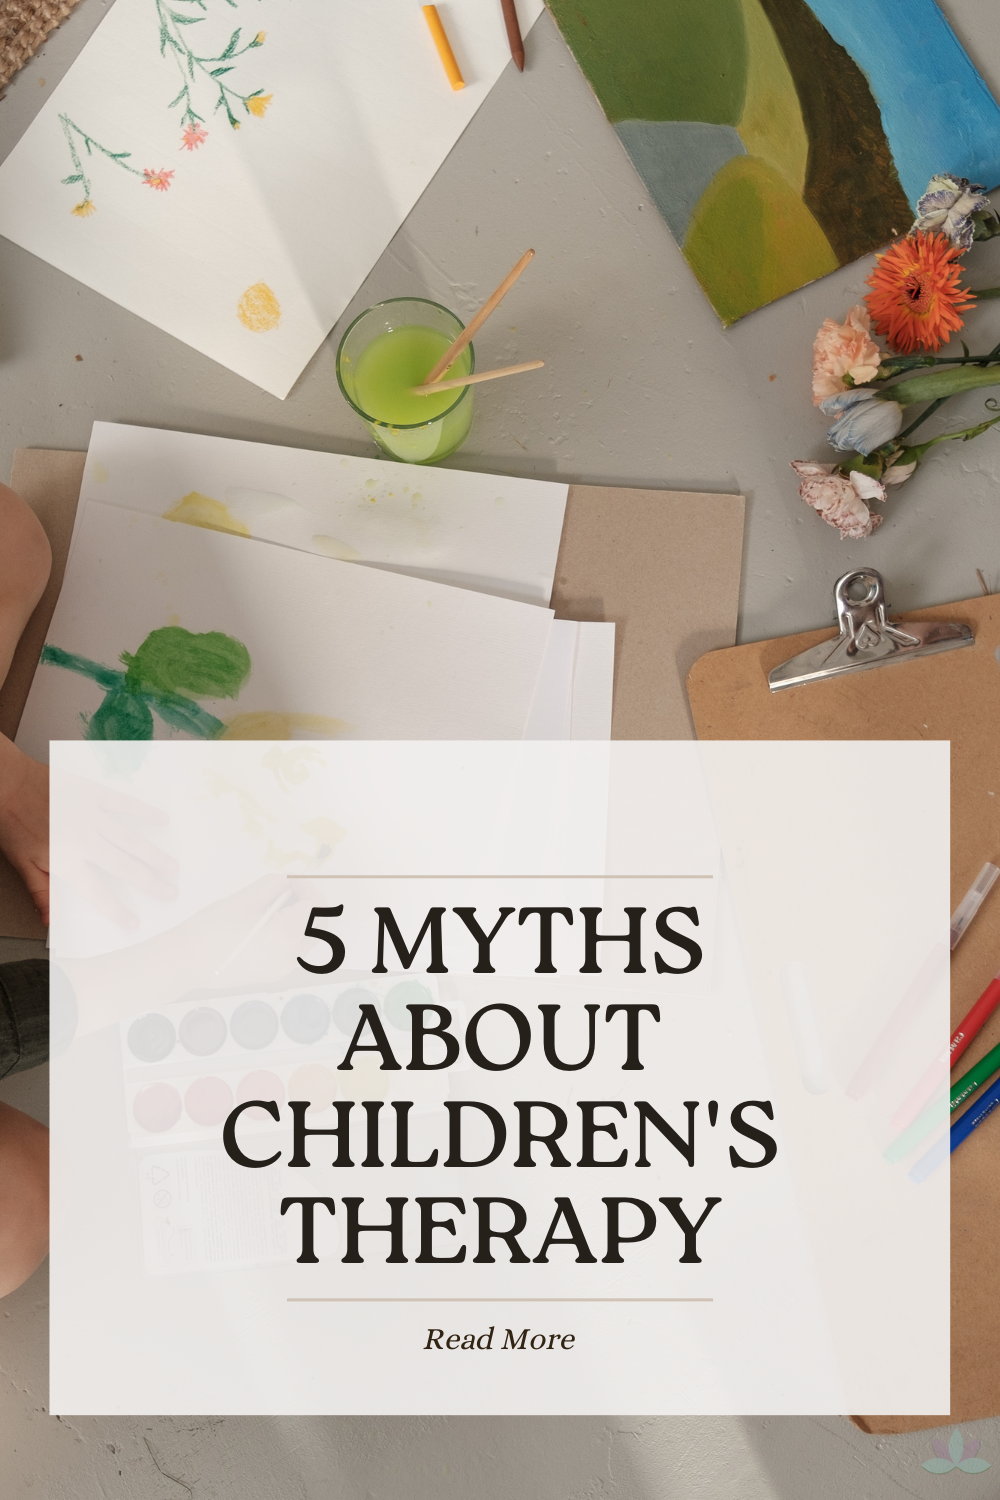 5 Myths About Children's Therapy